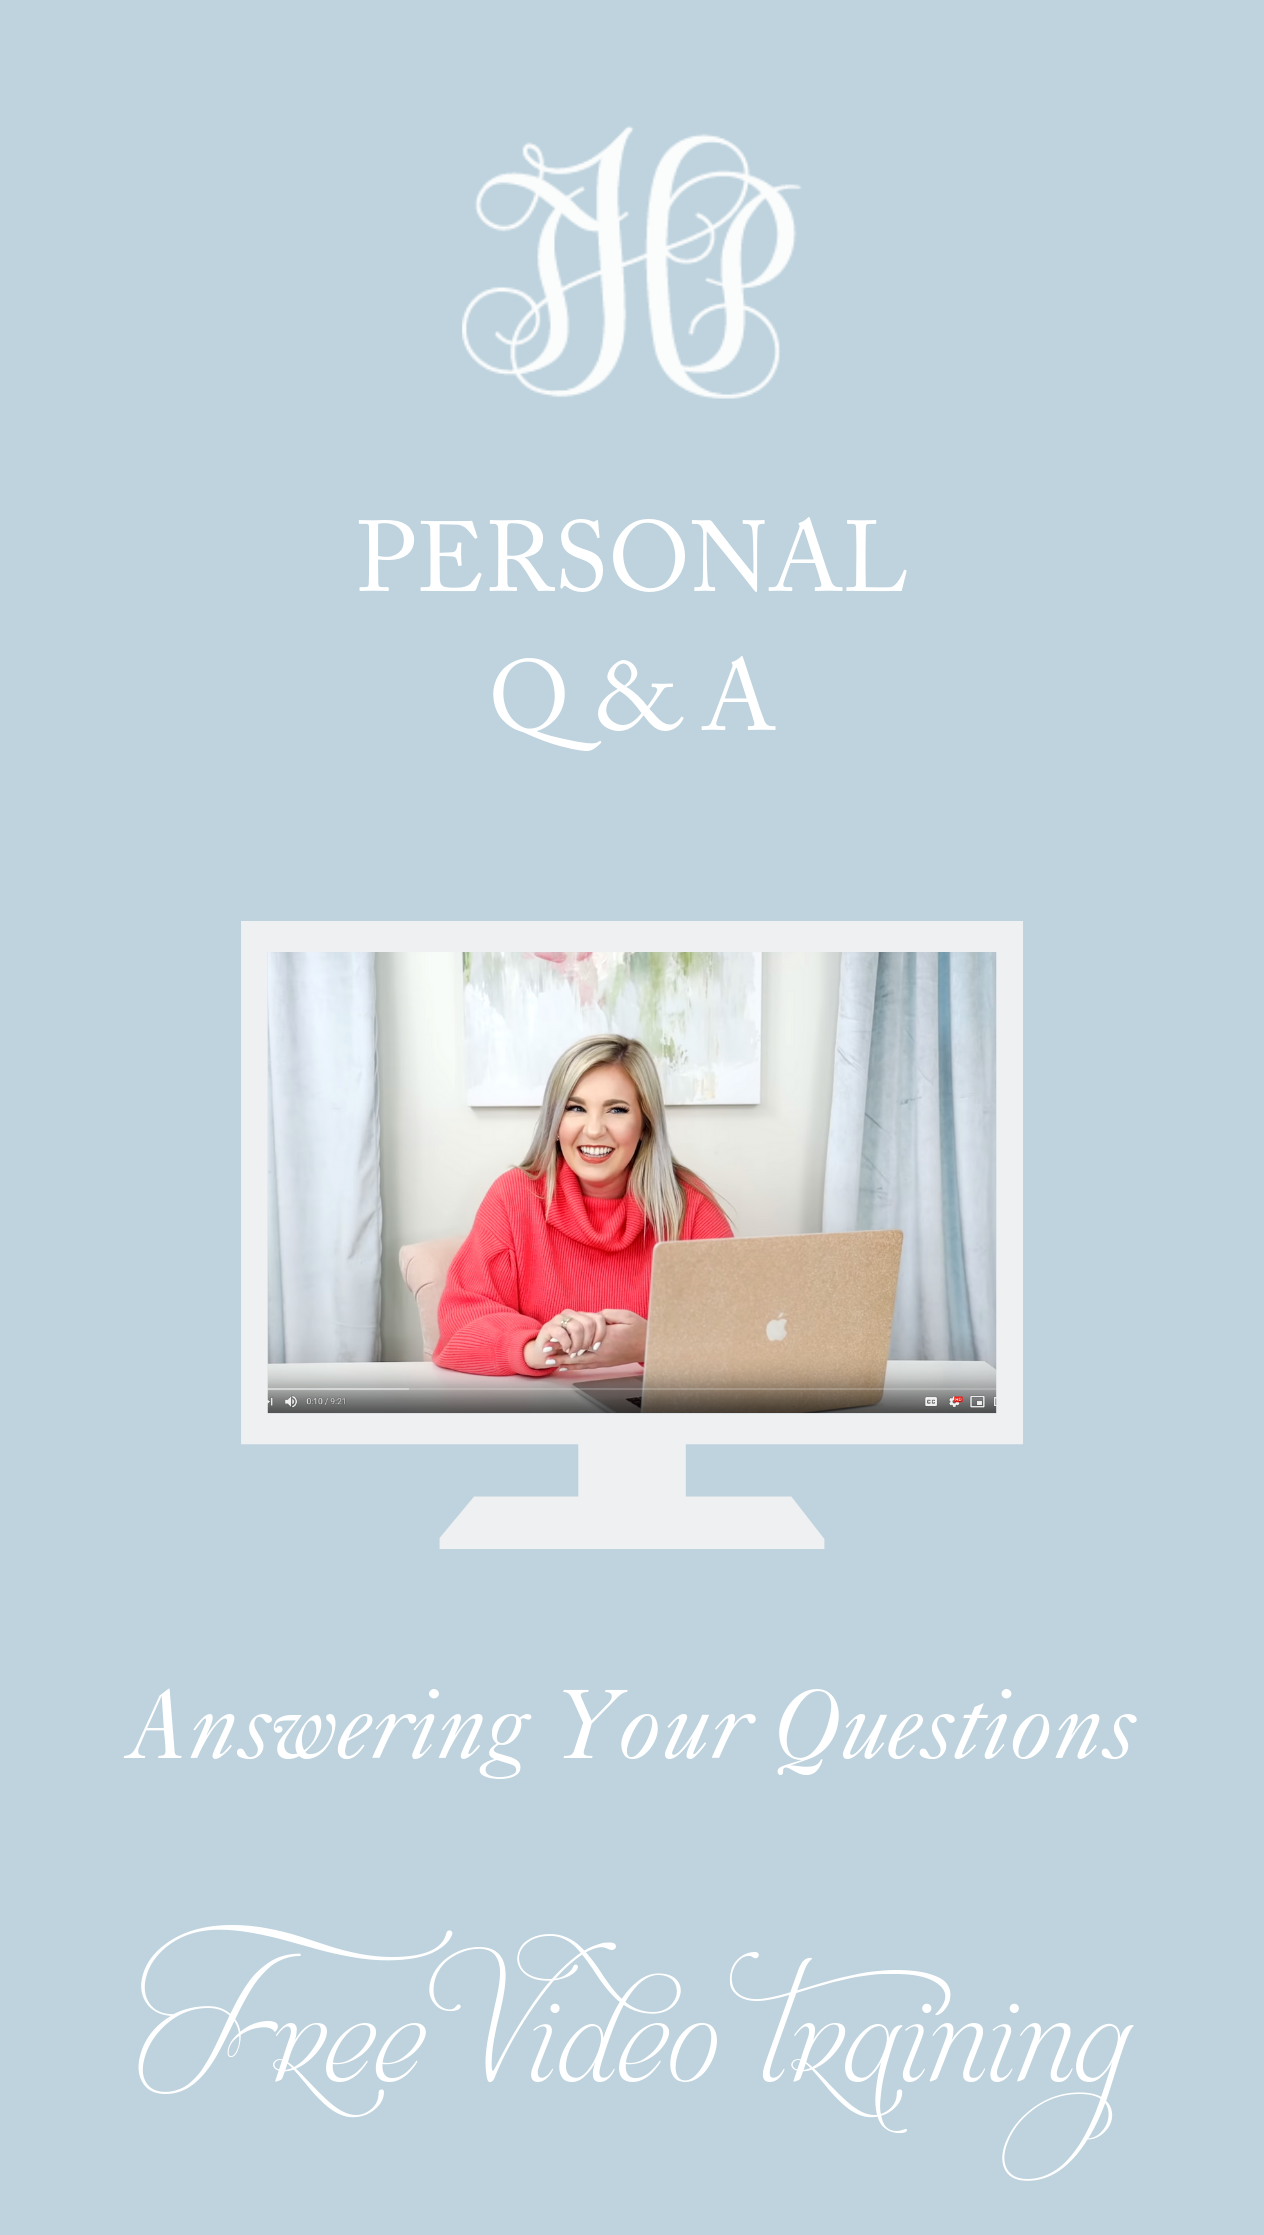 Personal Q&A - Answering Your Questions | Happy Hour with Hope Episode #10